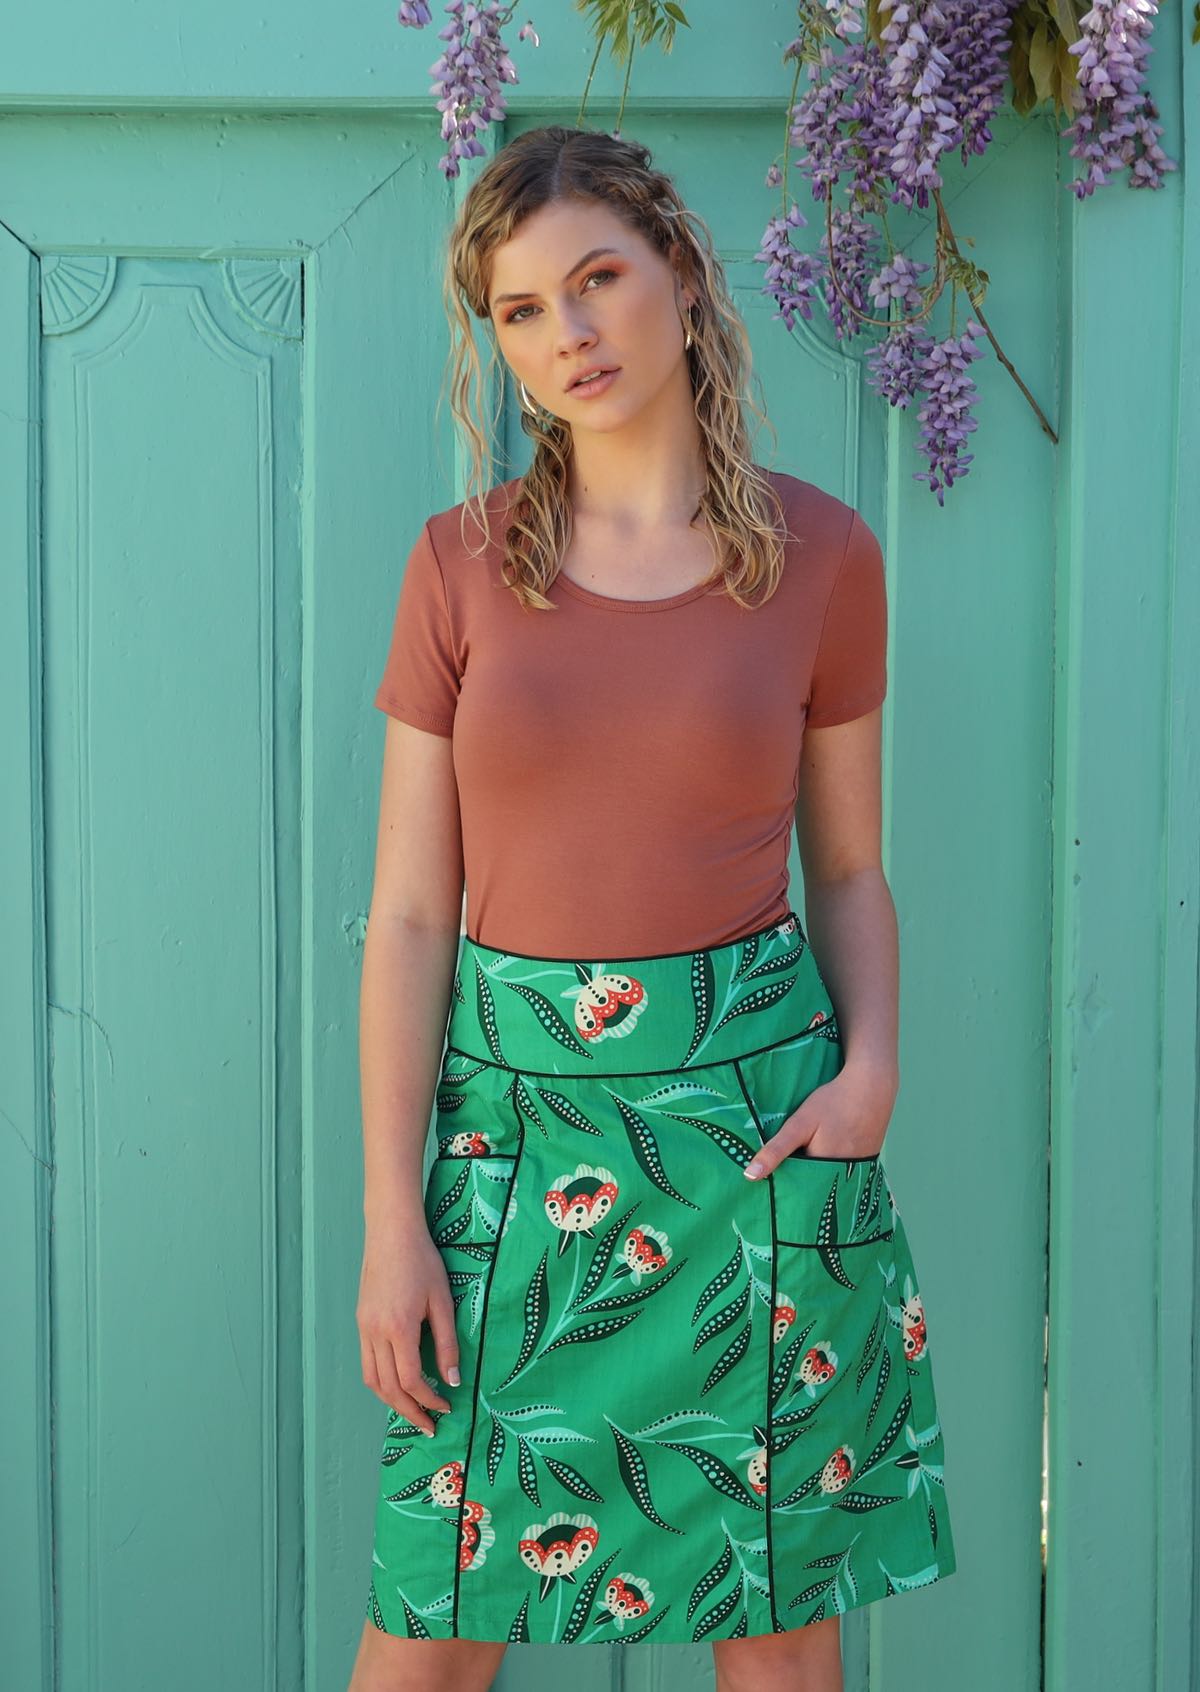 Model wears mint green cotton skirt with floral print